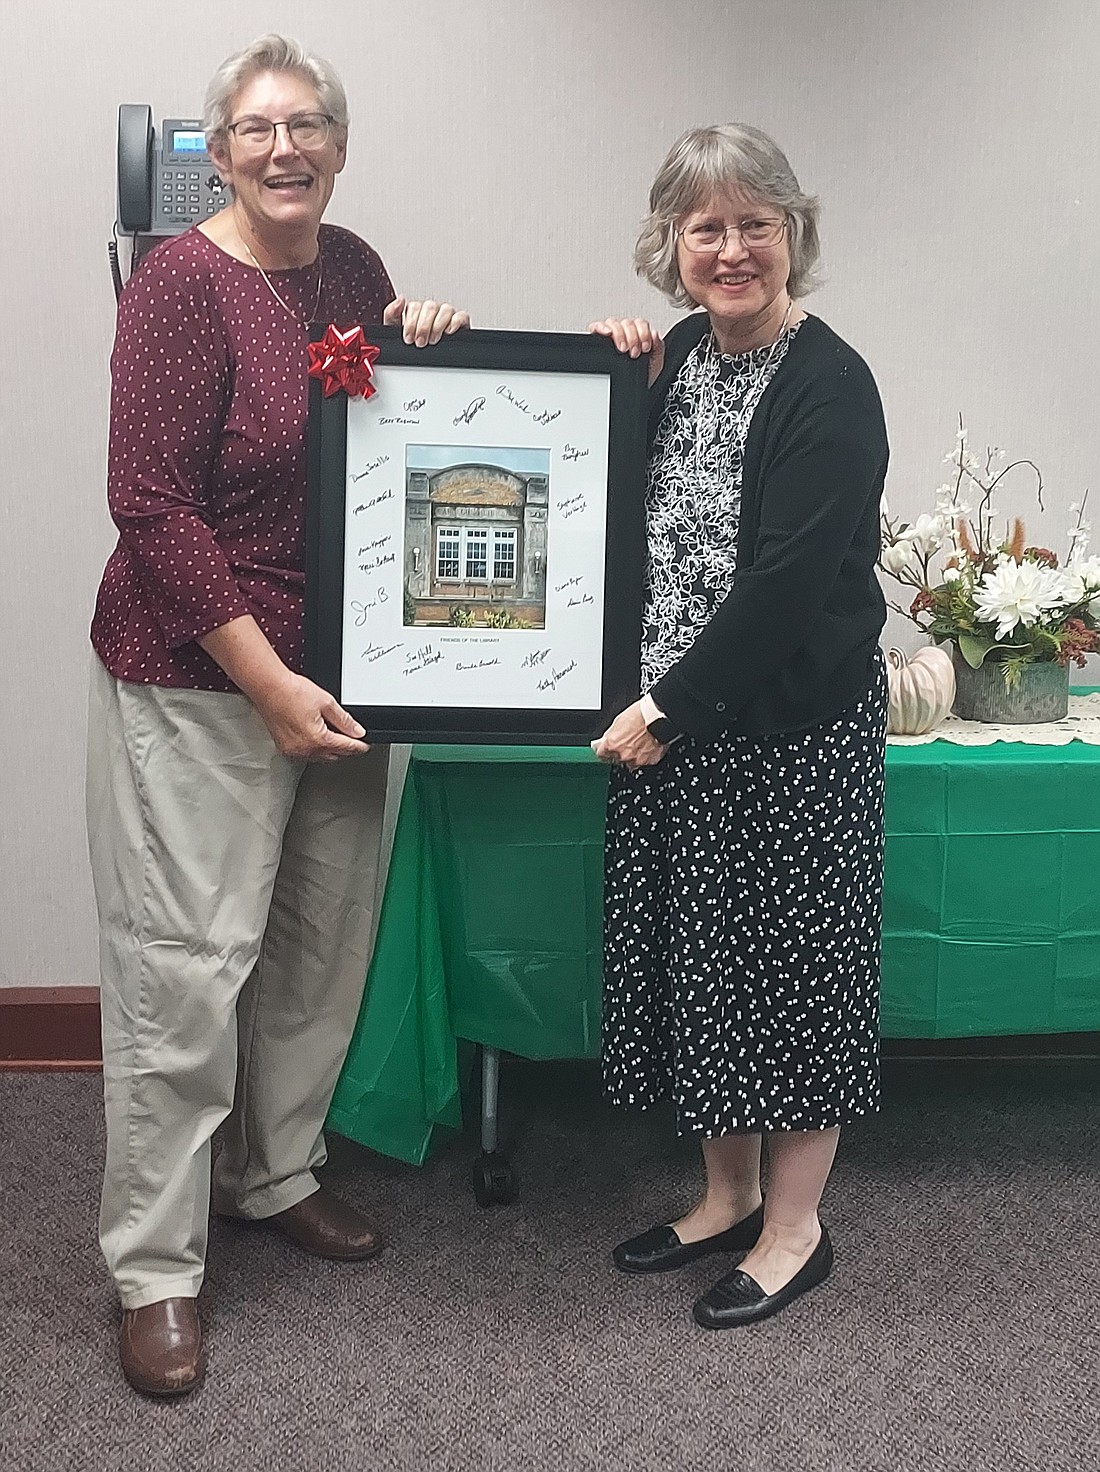 Ann Zydek, Warsaw Community Public Library director, was presented with a signed framed picture of the library during an open house celebrating her retirement Tuesday. Pictured (L to R) are Ann Werk, Friends of the Library president; and Zydek. Photo by Jackie Gorski, Times-Union